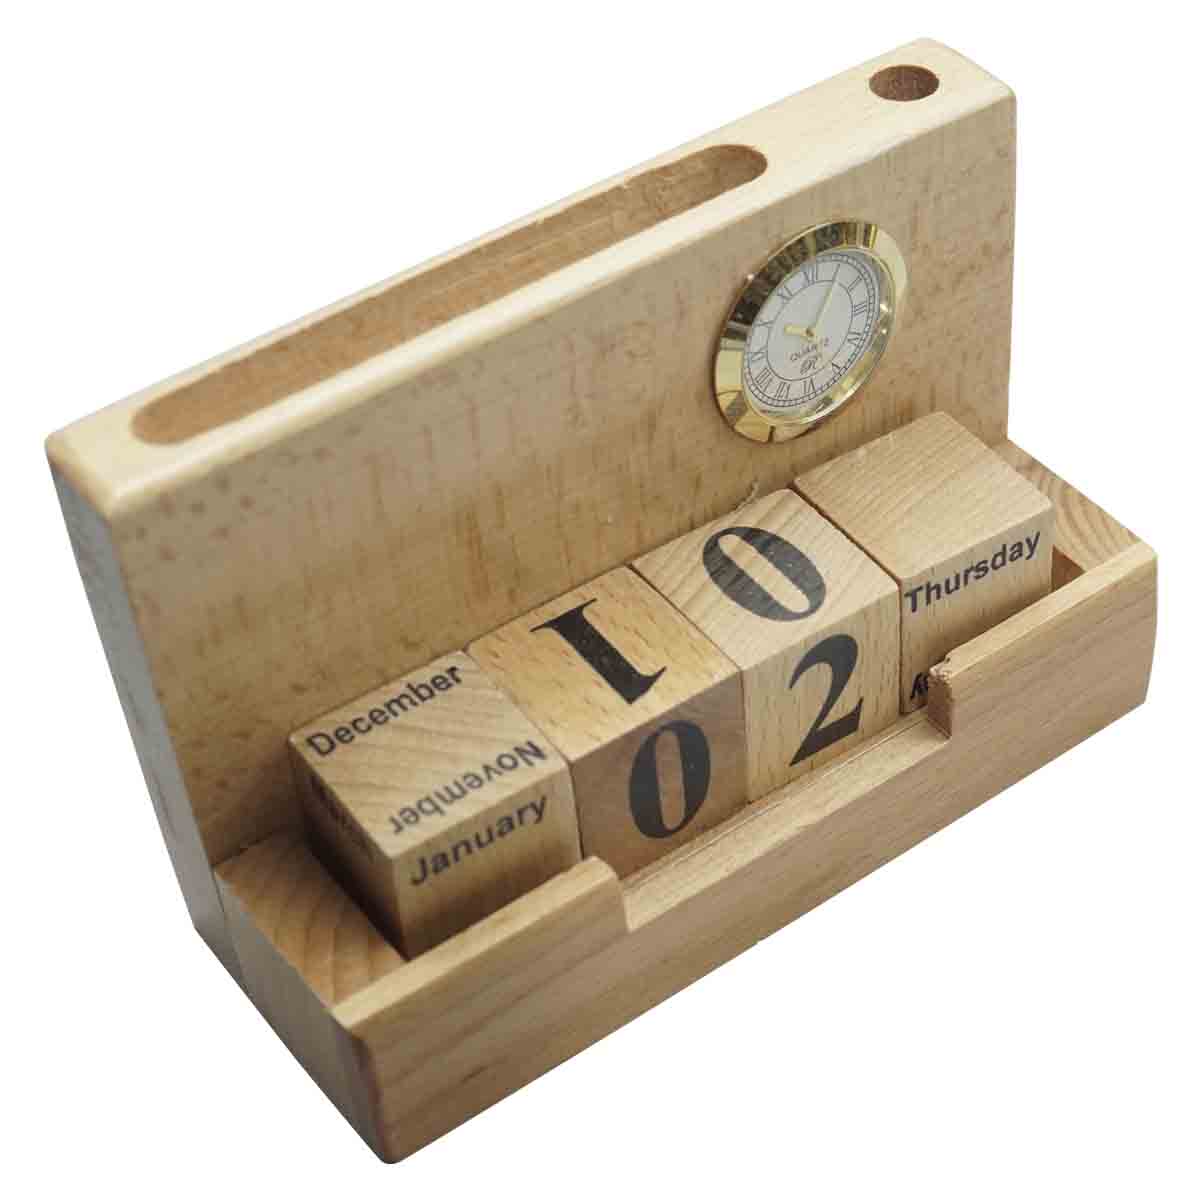 penhouse.in Card Holder pen holder Clock and Calender with customization SKU - 87130